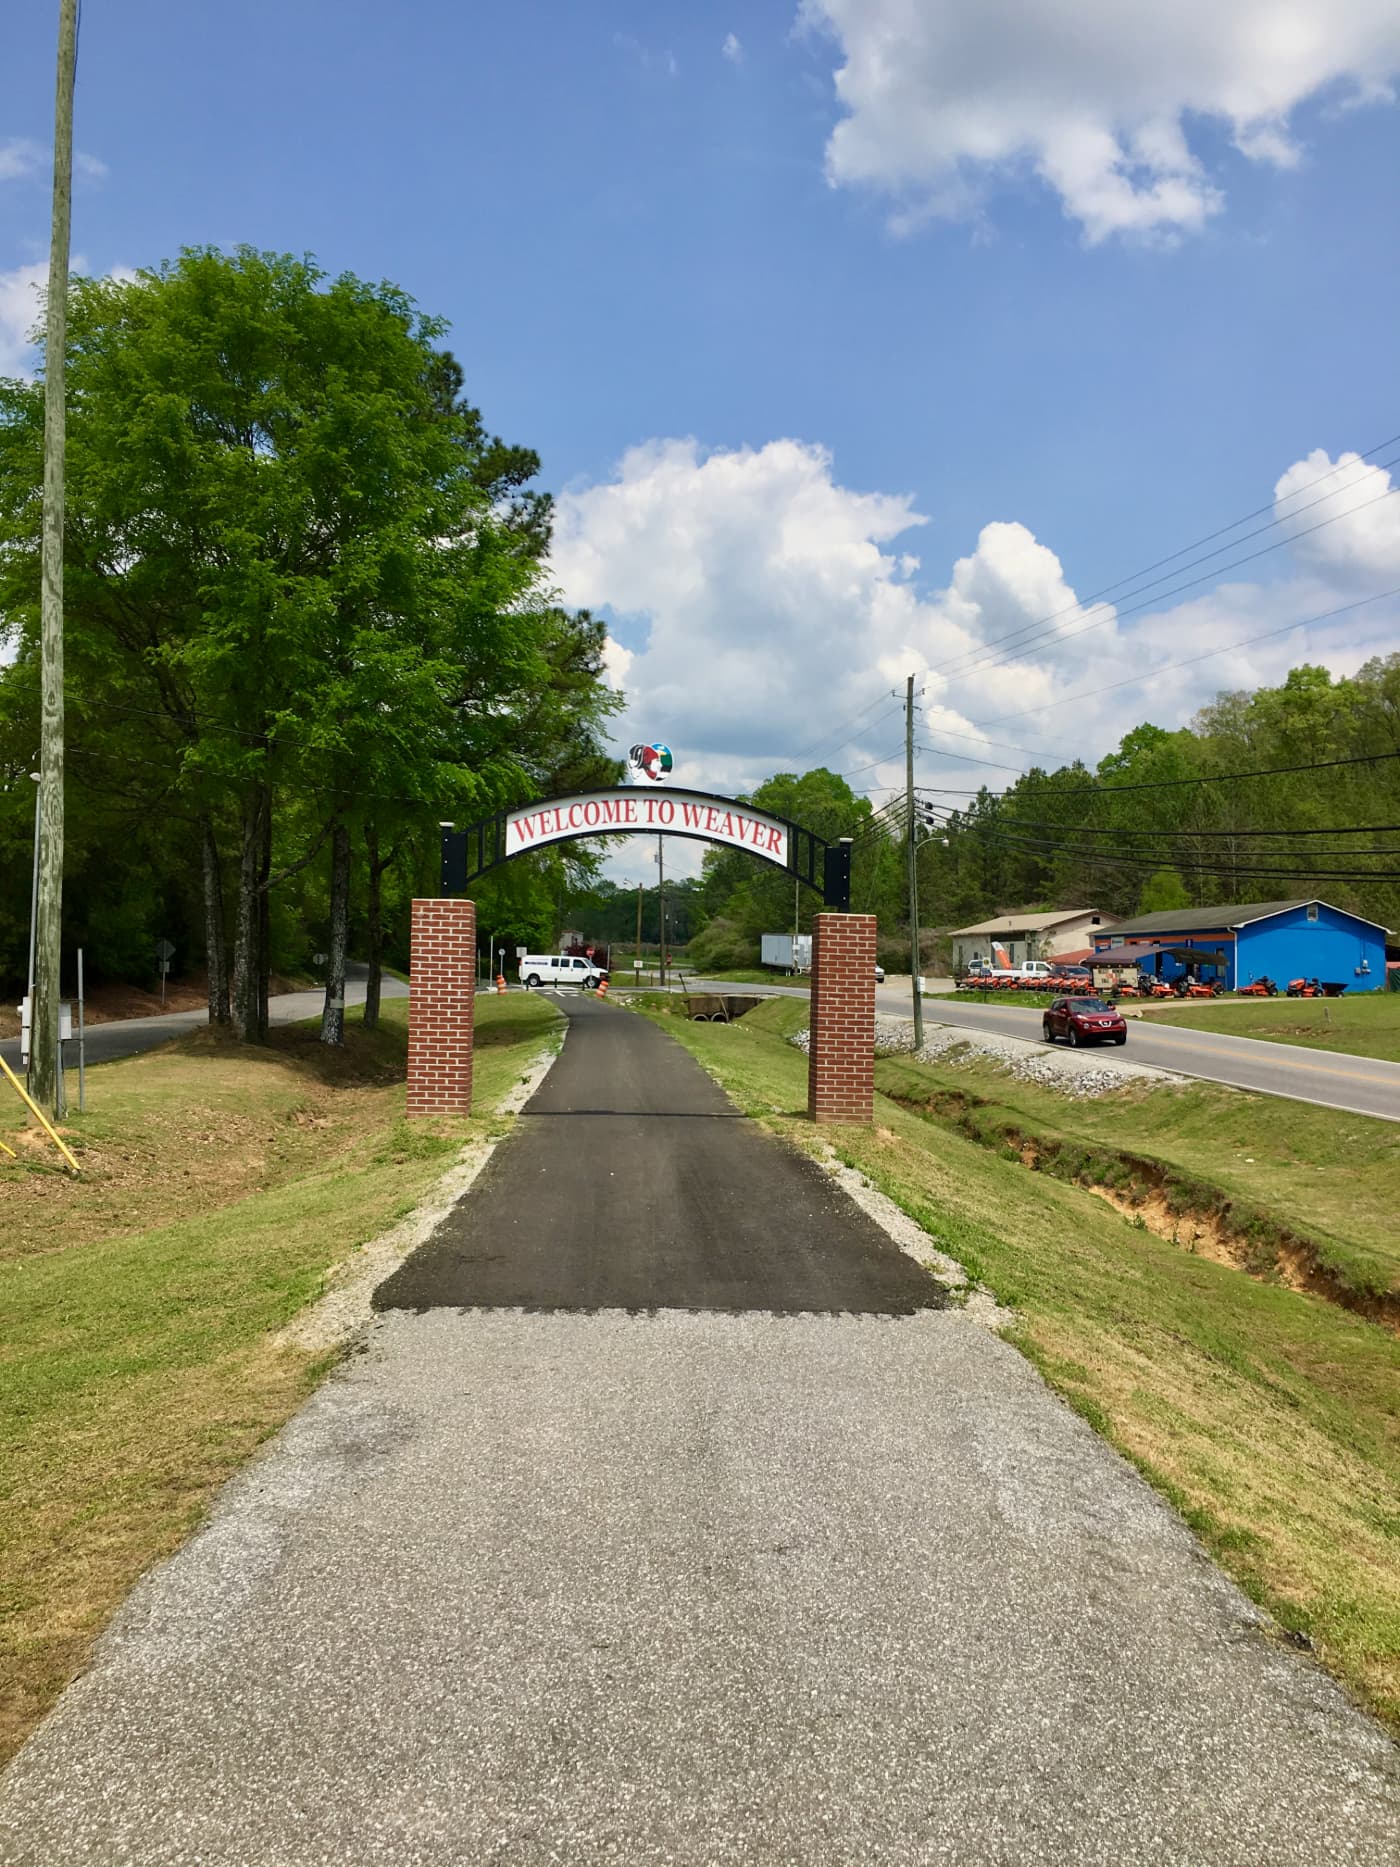 Image of the rail trail with a sign saying "Welcome to Weaver" on brick pillars.